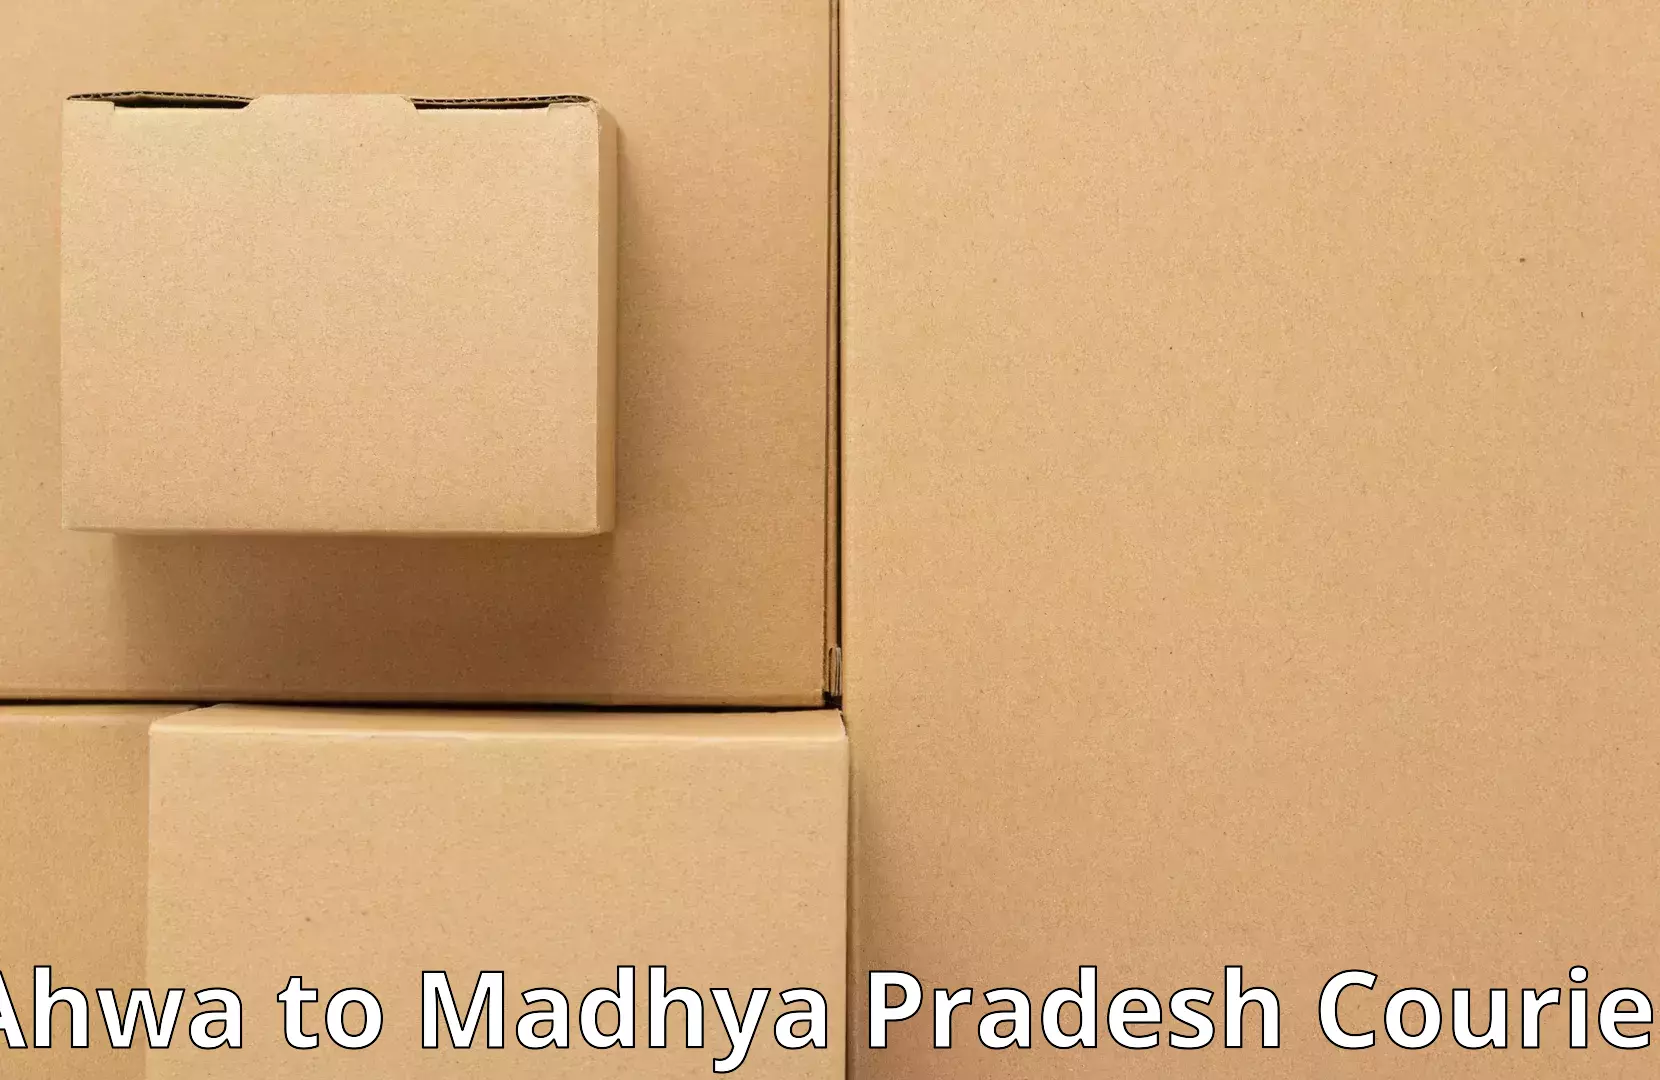 Trusted moving company Ahwa to Indore